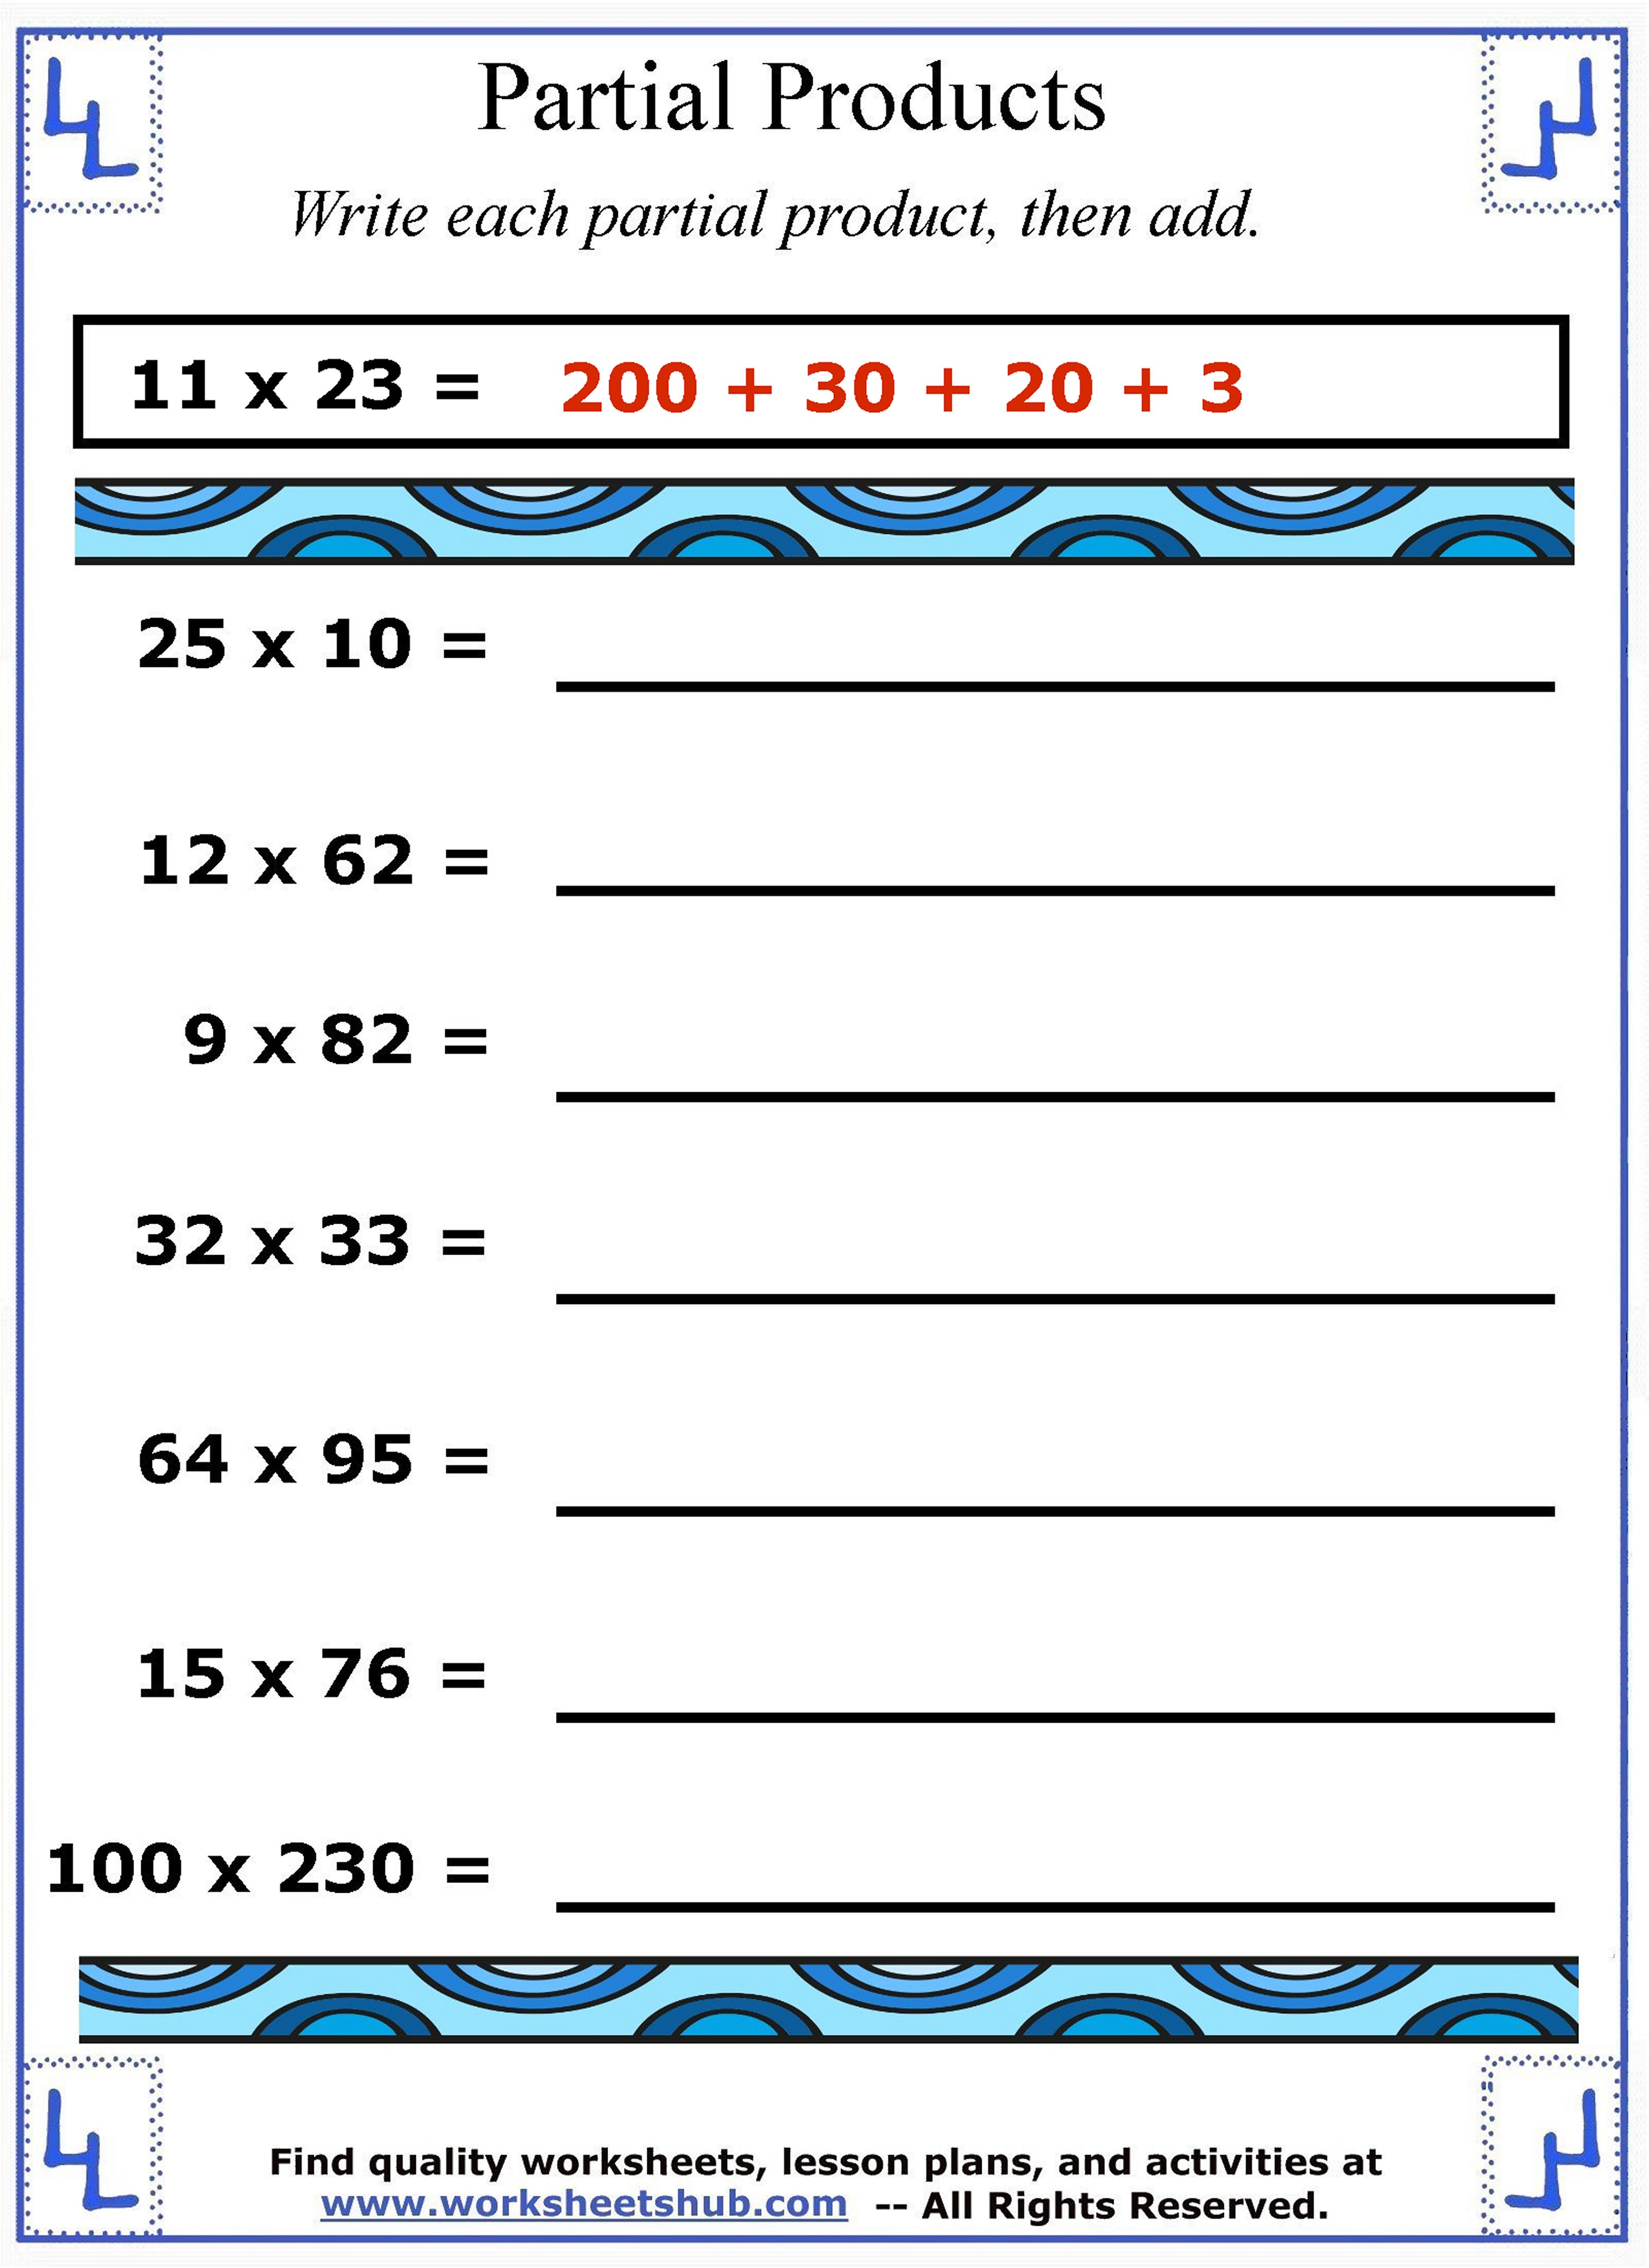 partial-product-multiplication-worksheet